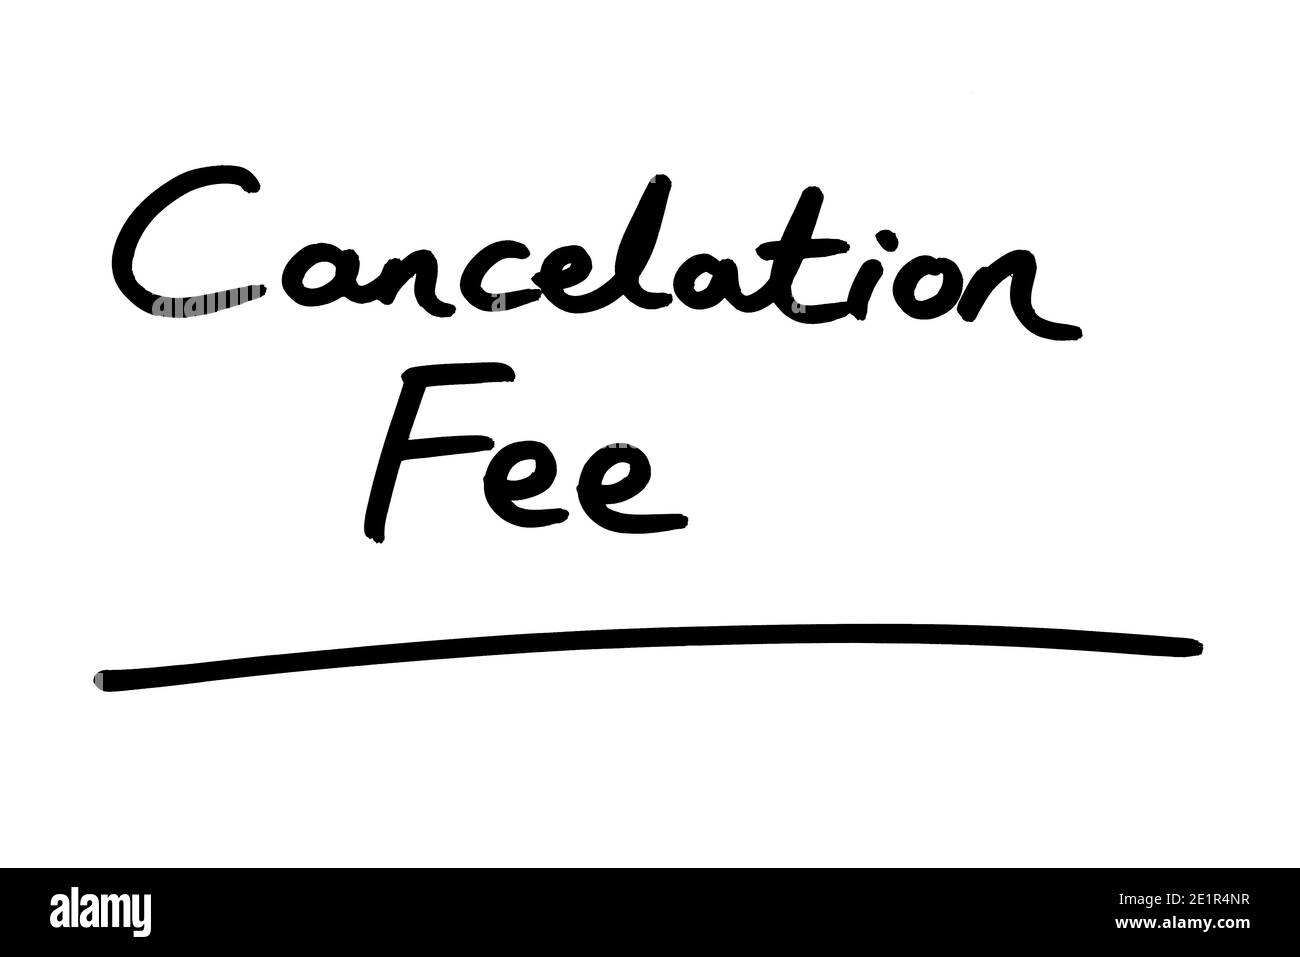 Cancelation Fee - American spelling - handwritten on a white background. Stock Photo